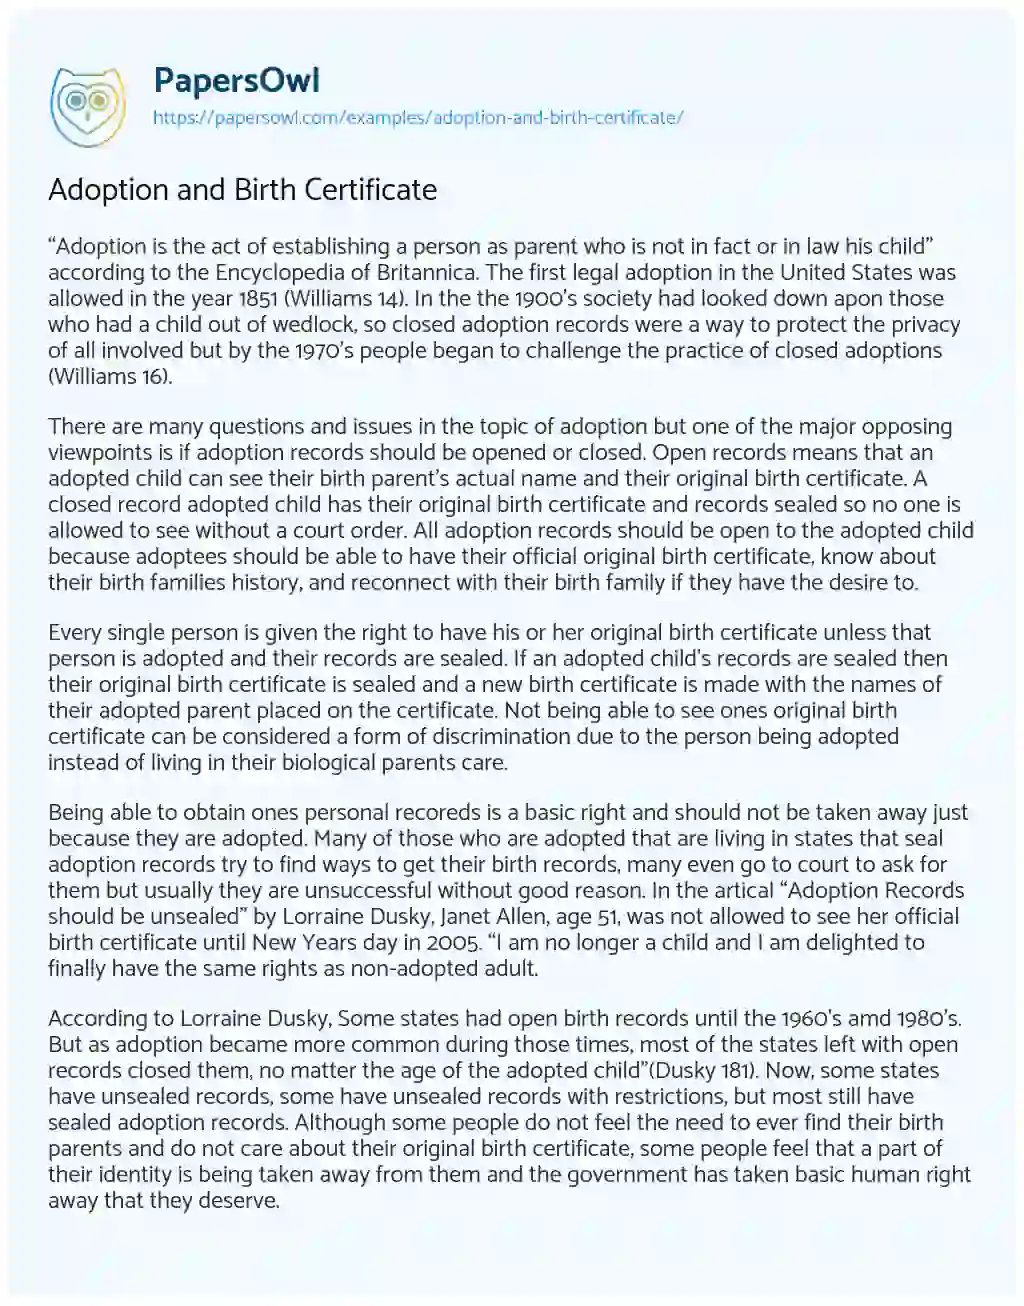 Essay on Adoption and Birth Certificate